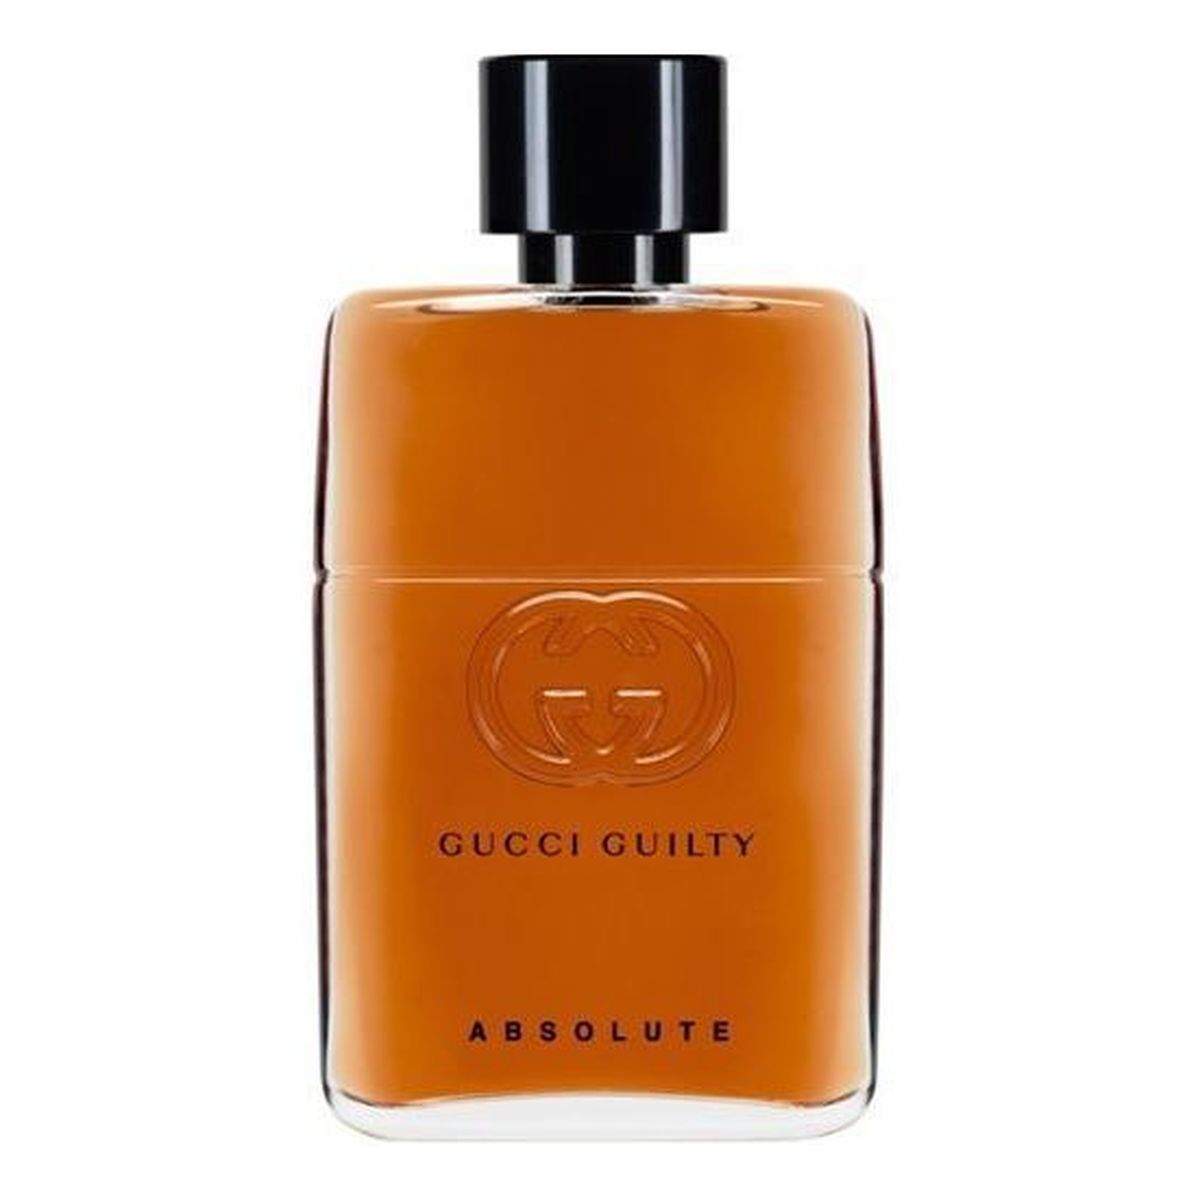 Gucci Guilty Absolute Pour Homme woda perfumowana 150ml